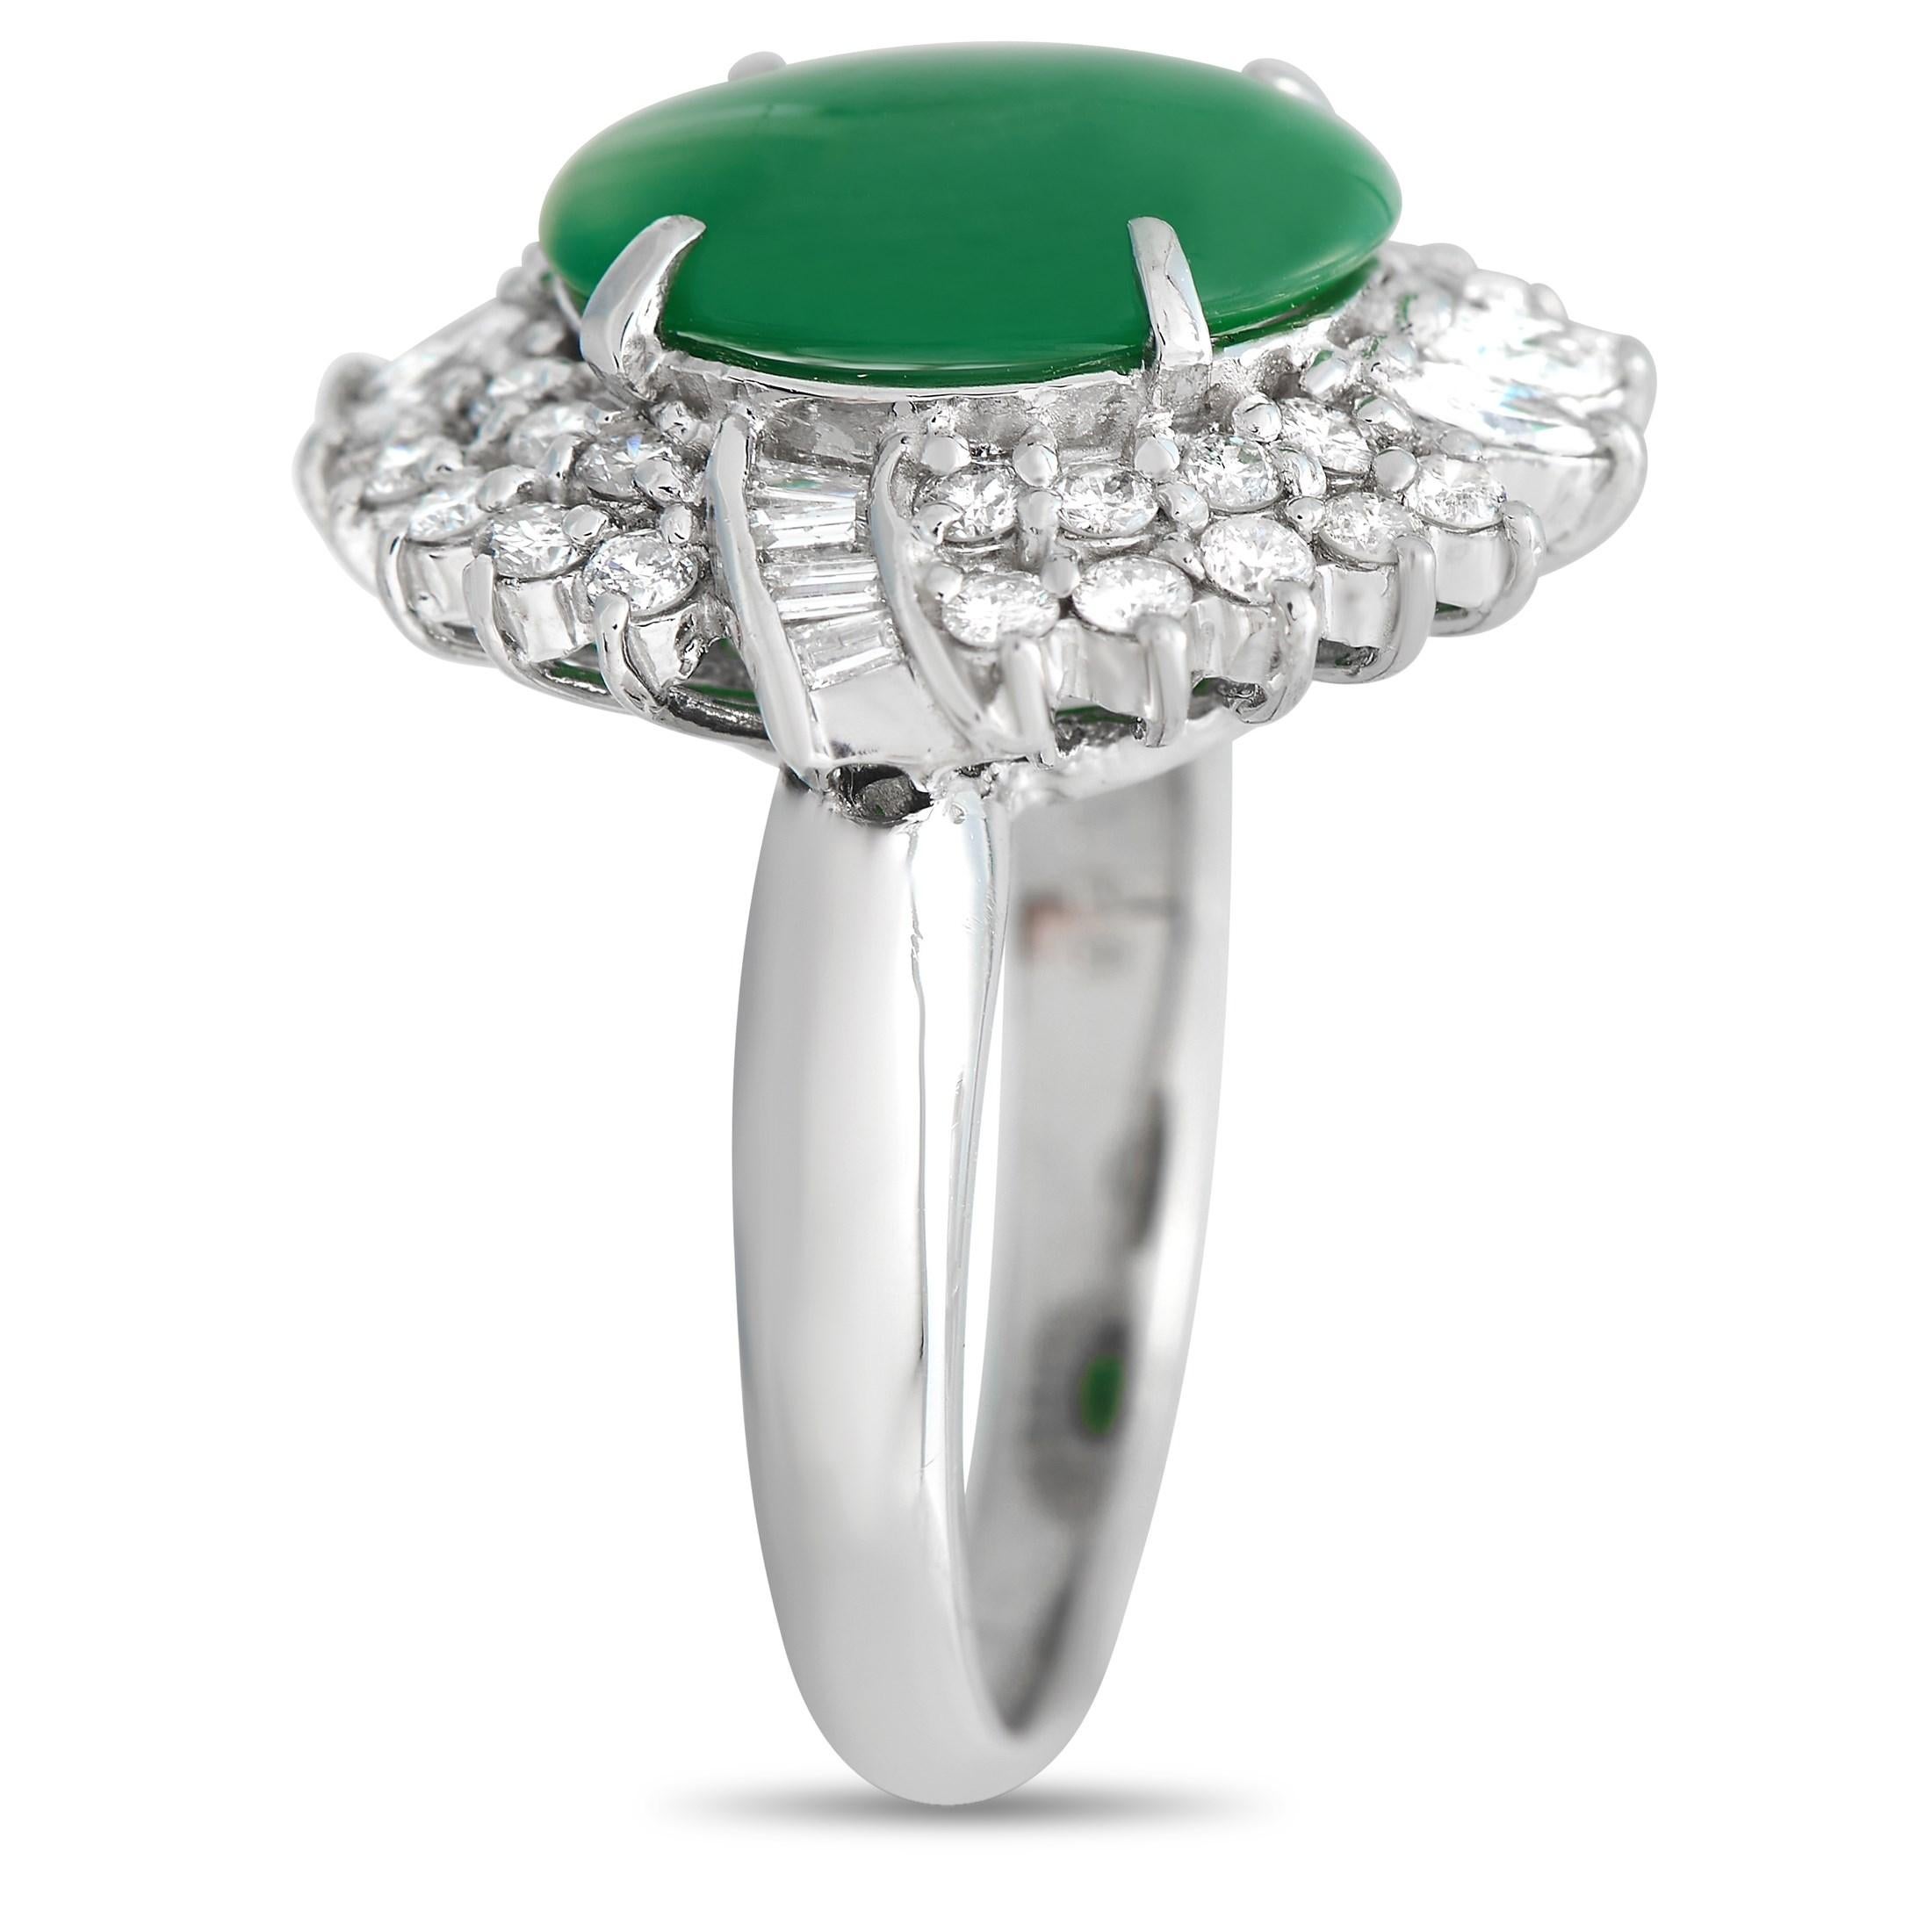 This ring will easily get anyone mesmerized. On a polished platinum band is a 3.78 carat oval jade gemstone surrounded by a double halo of round diamonds broken into quarters by two pairs of marquise diamonds and a ribbon of tapered baguette